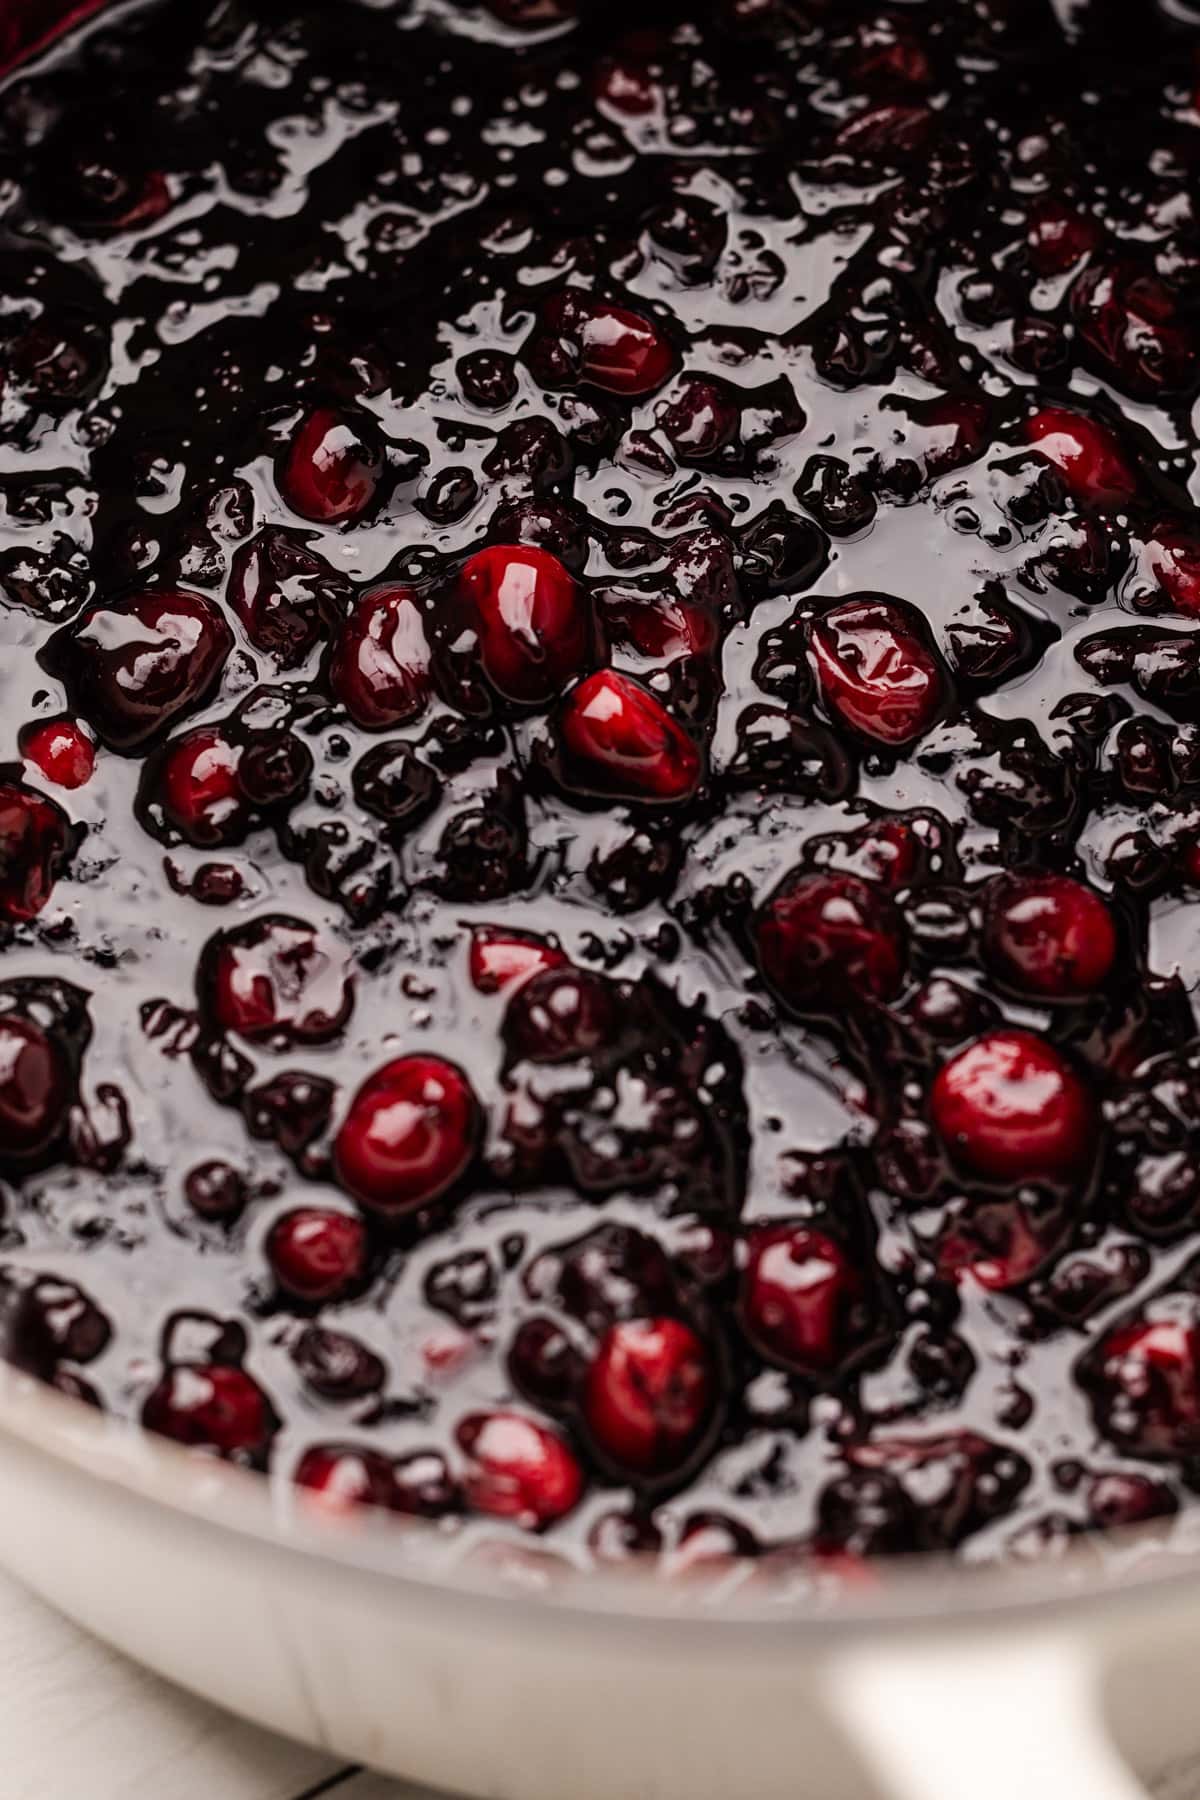 Cooking blueberry cranberry filling.